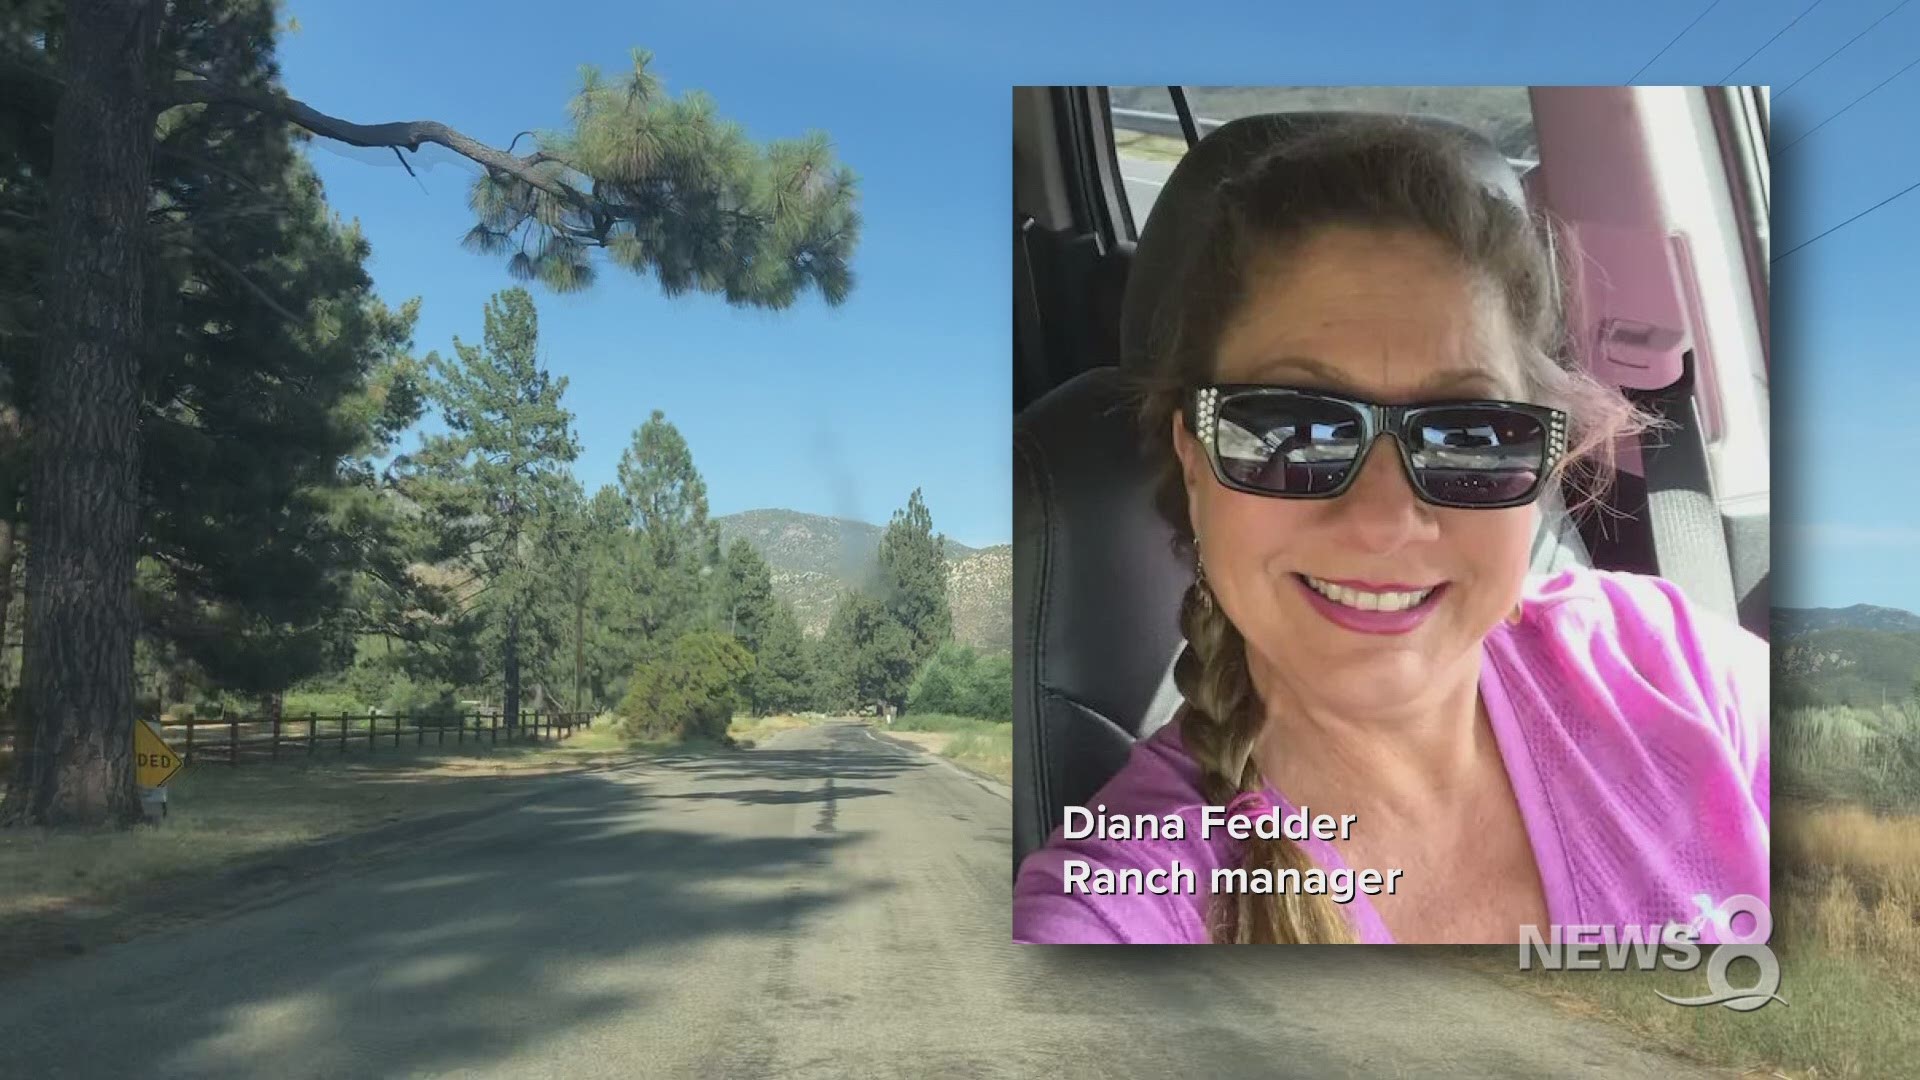 Diana Fedder's extended interview clips, reaction to probate petition filed by the family of Dia Abrams, who went missing from her ranch near Idyllwild in June 2020.